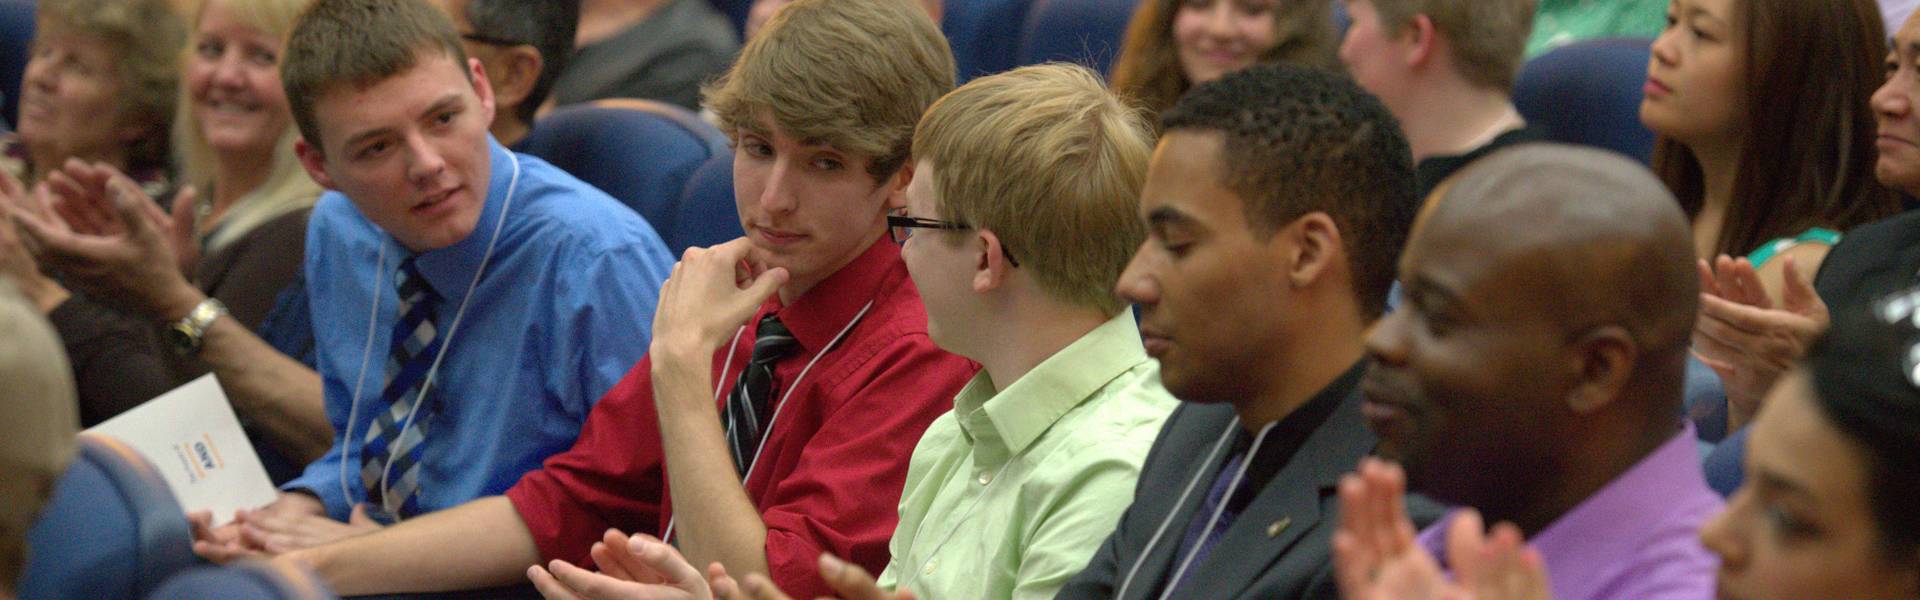 Honors students applaud each other at an awards ceremony